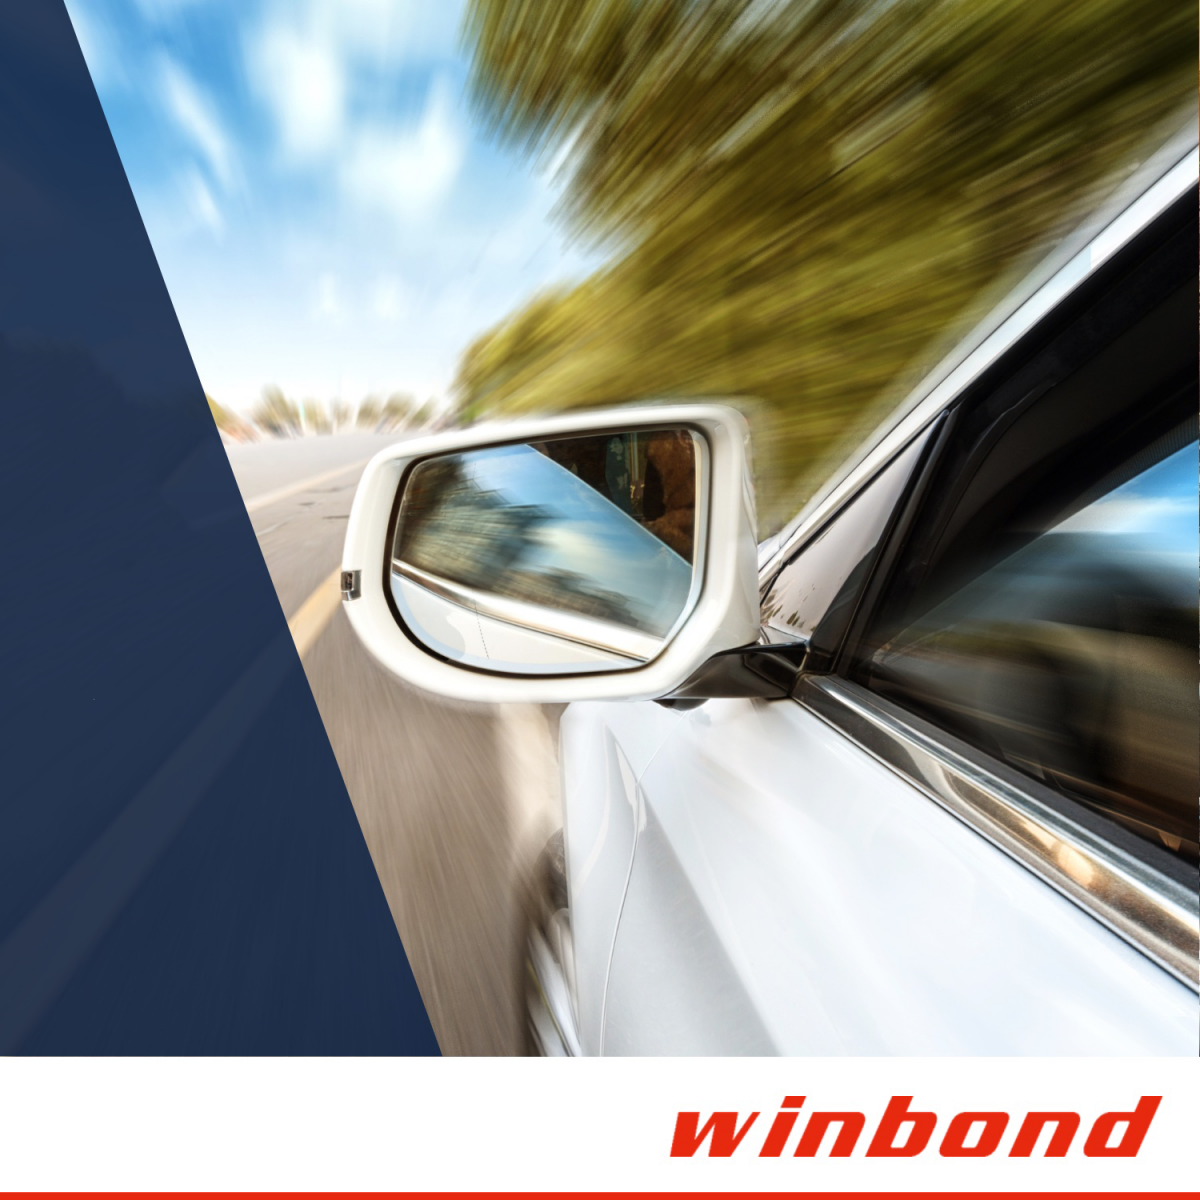 Winbond receives ISO/SAE 21434 certification for Road vehicles